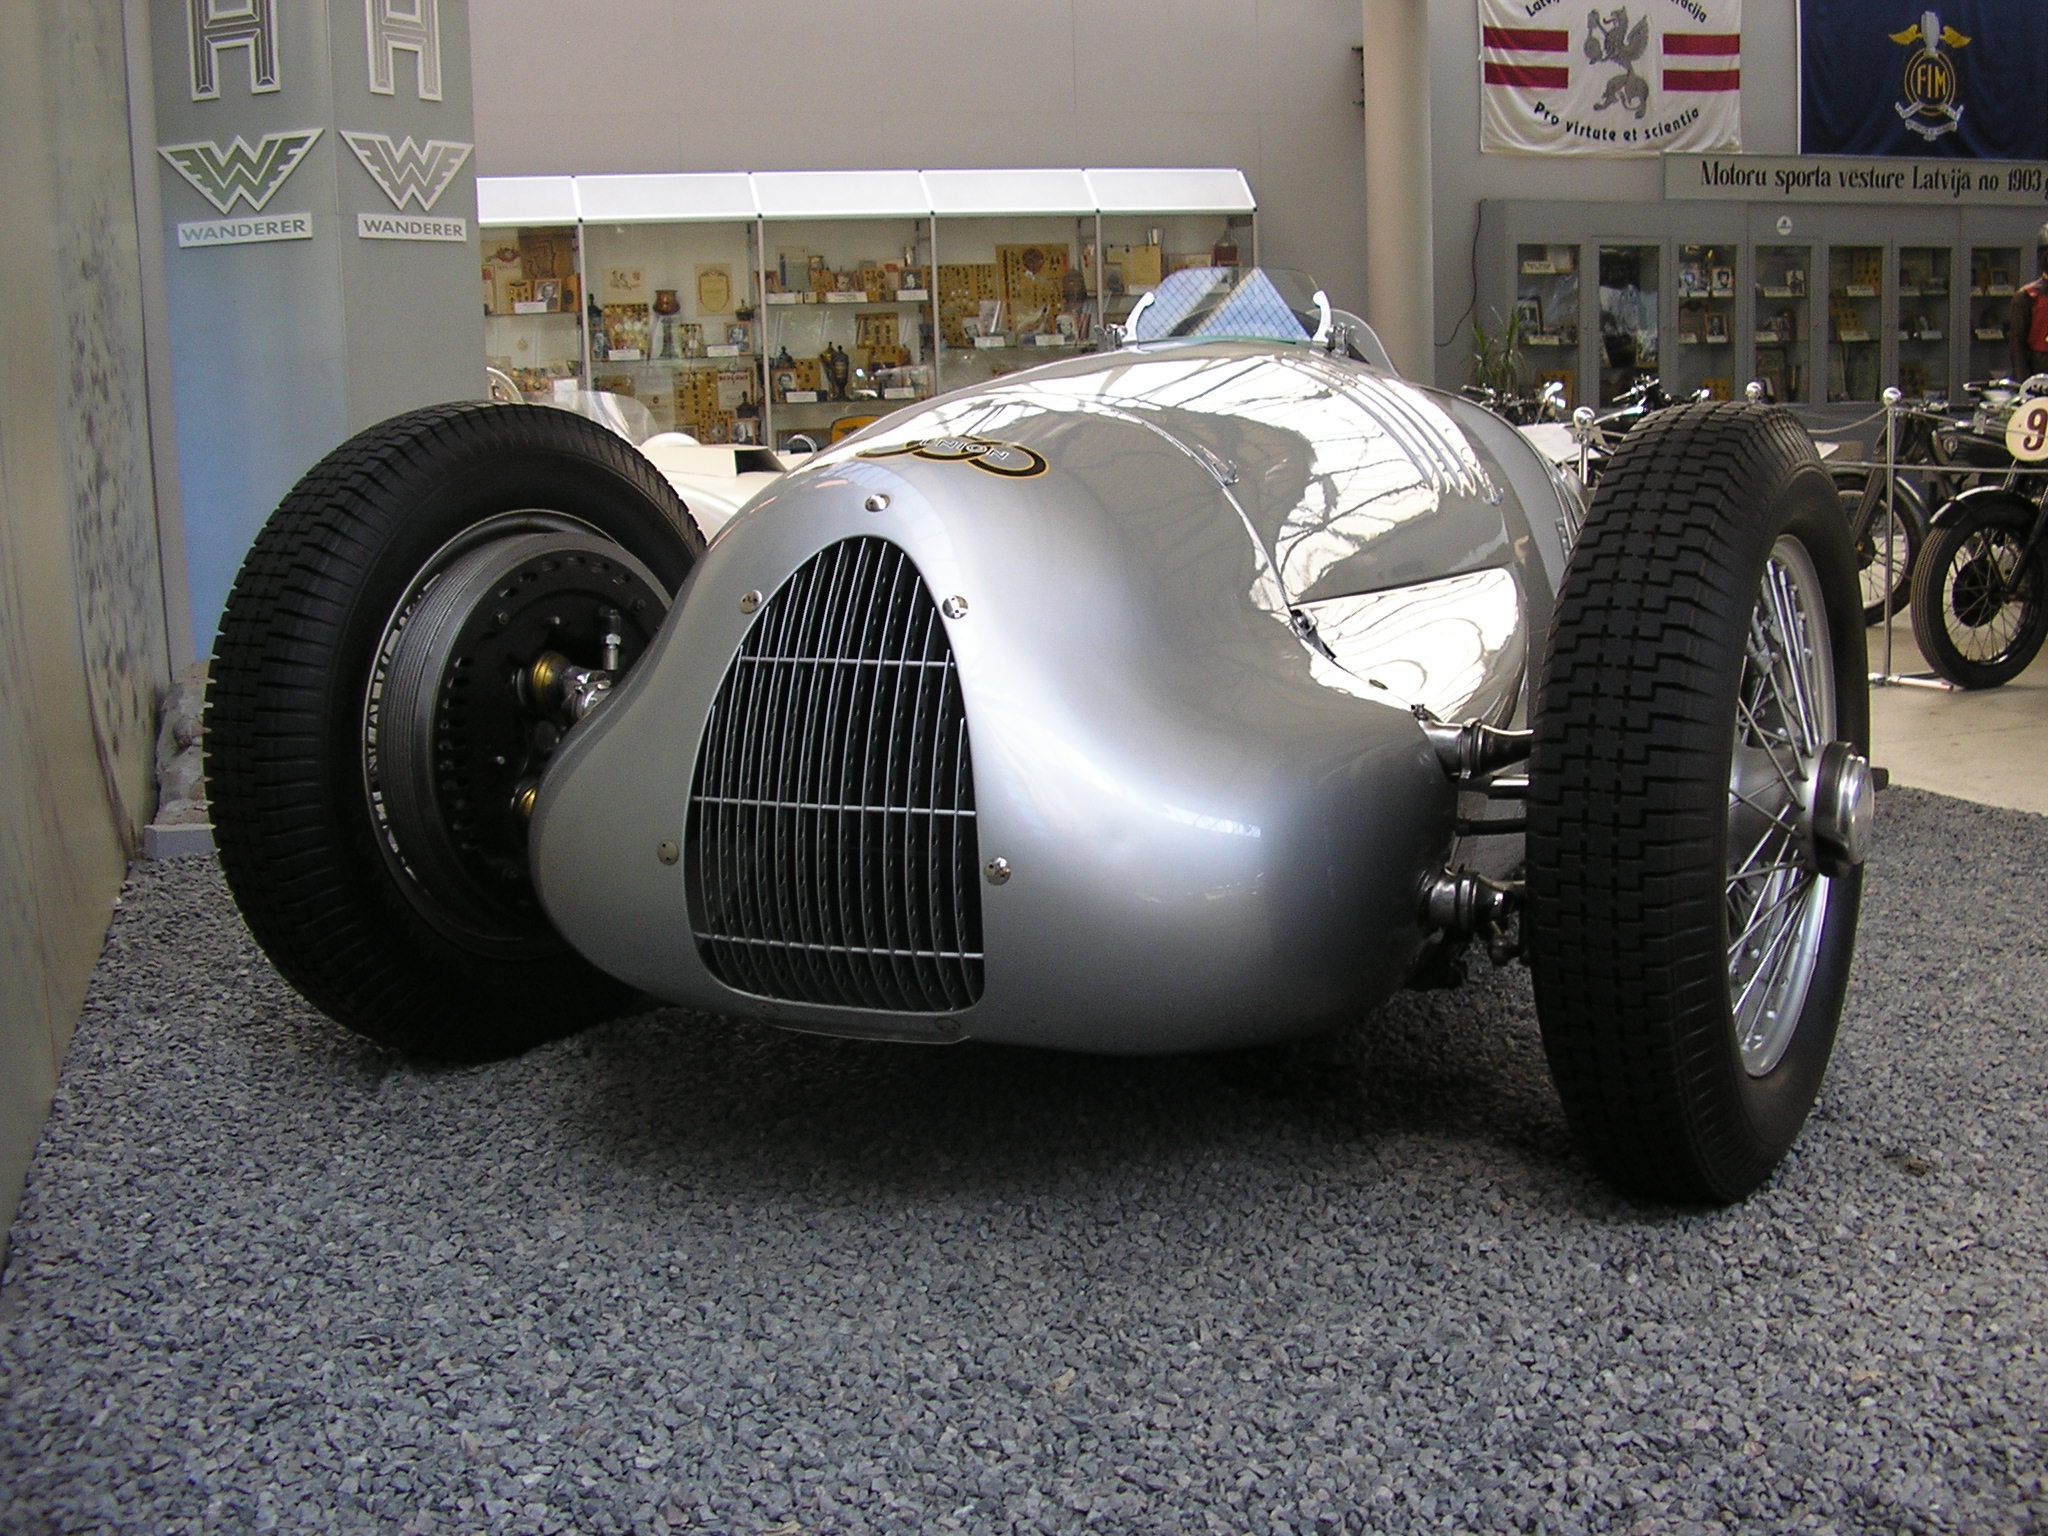 Auto Union 1000 S 4T Photo Gallery: Photo #06 out of 11, Image ...